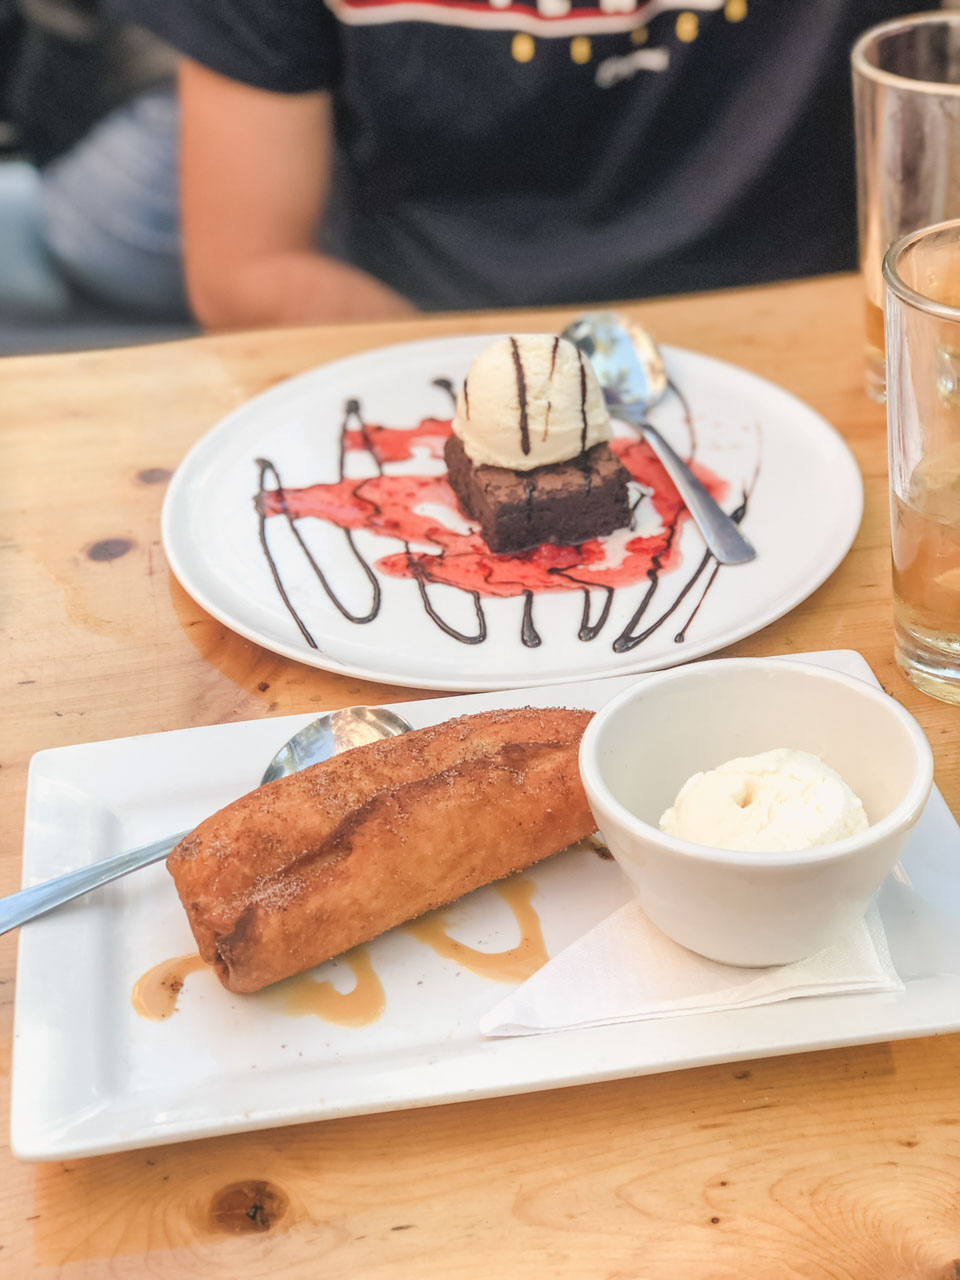 Fried apple pie with ice cream and a brownie with ice cream at Queen St. Warehouse in Toronto